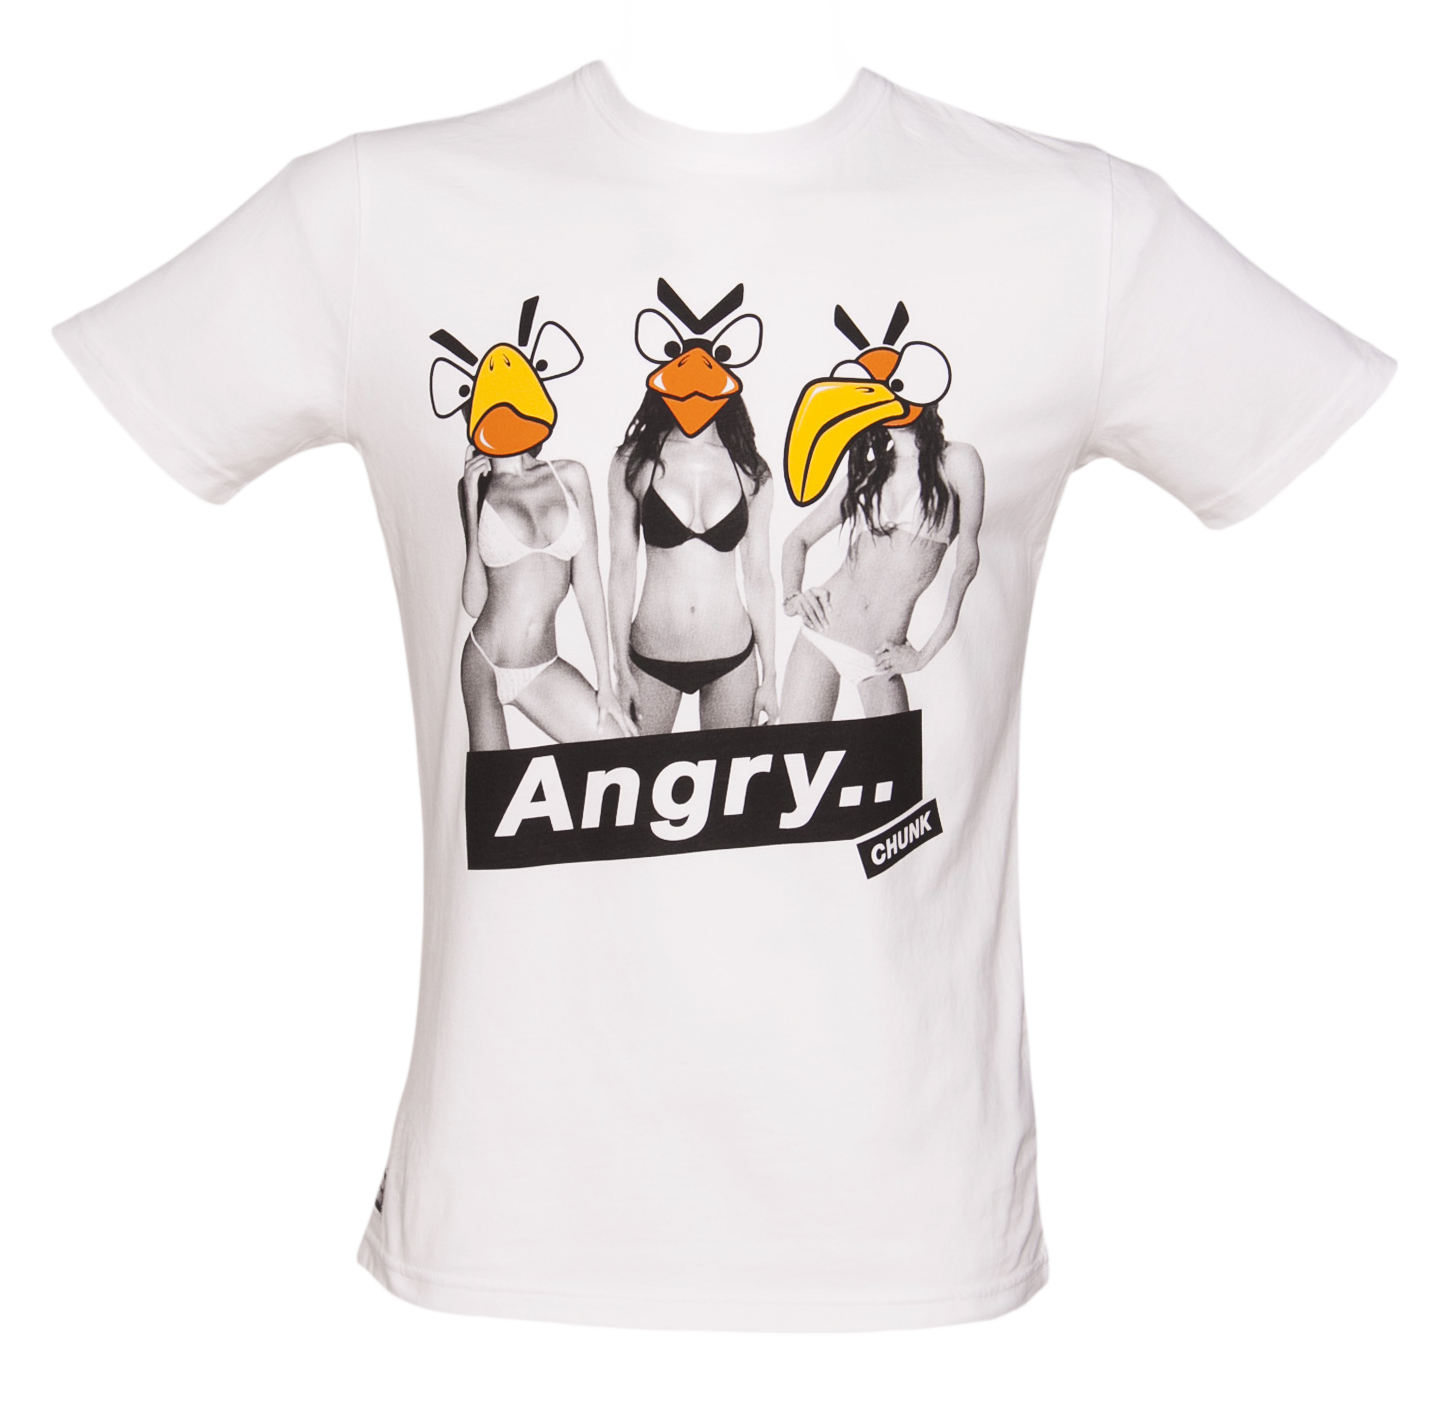 Mens White Angry Chicks T-Shirt from Chunk